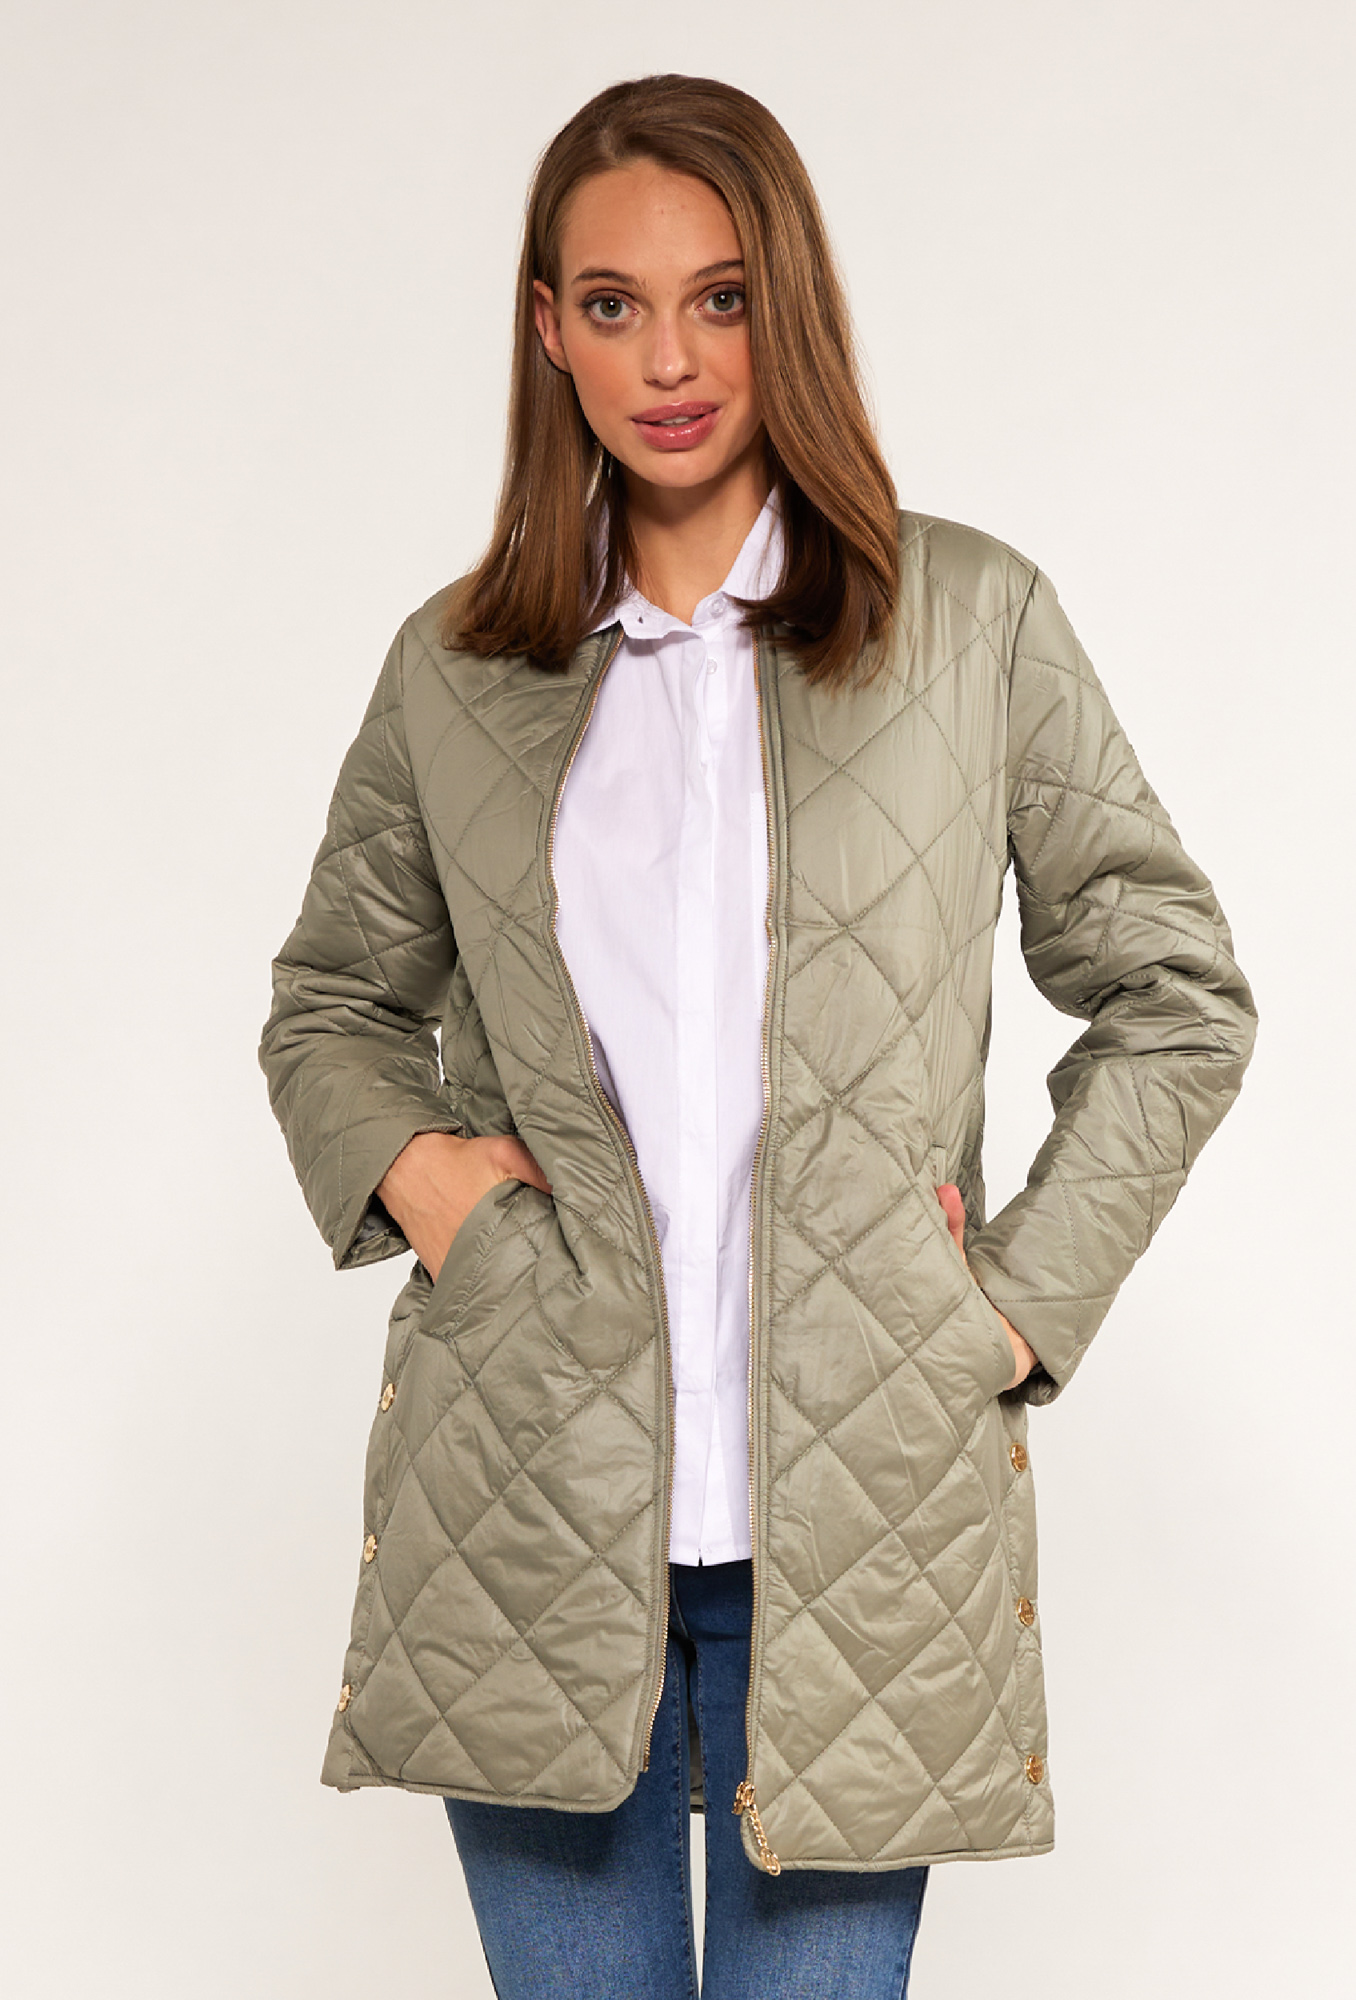 MONNARI Woman's Coats Quilted Coat With Stand-Up Collar